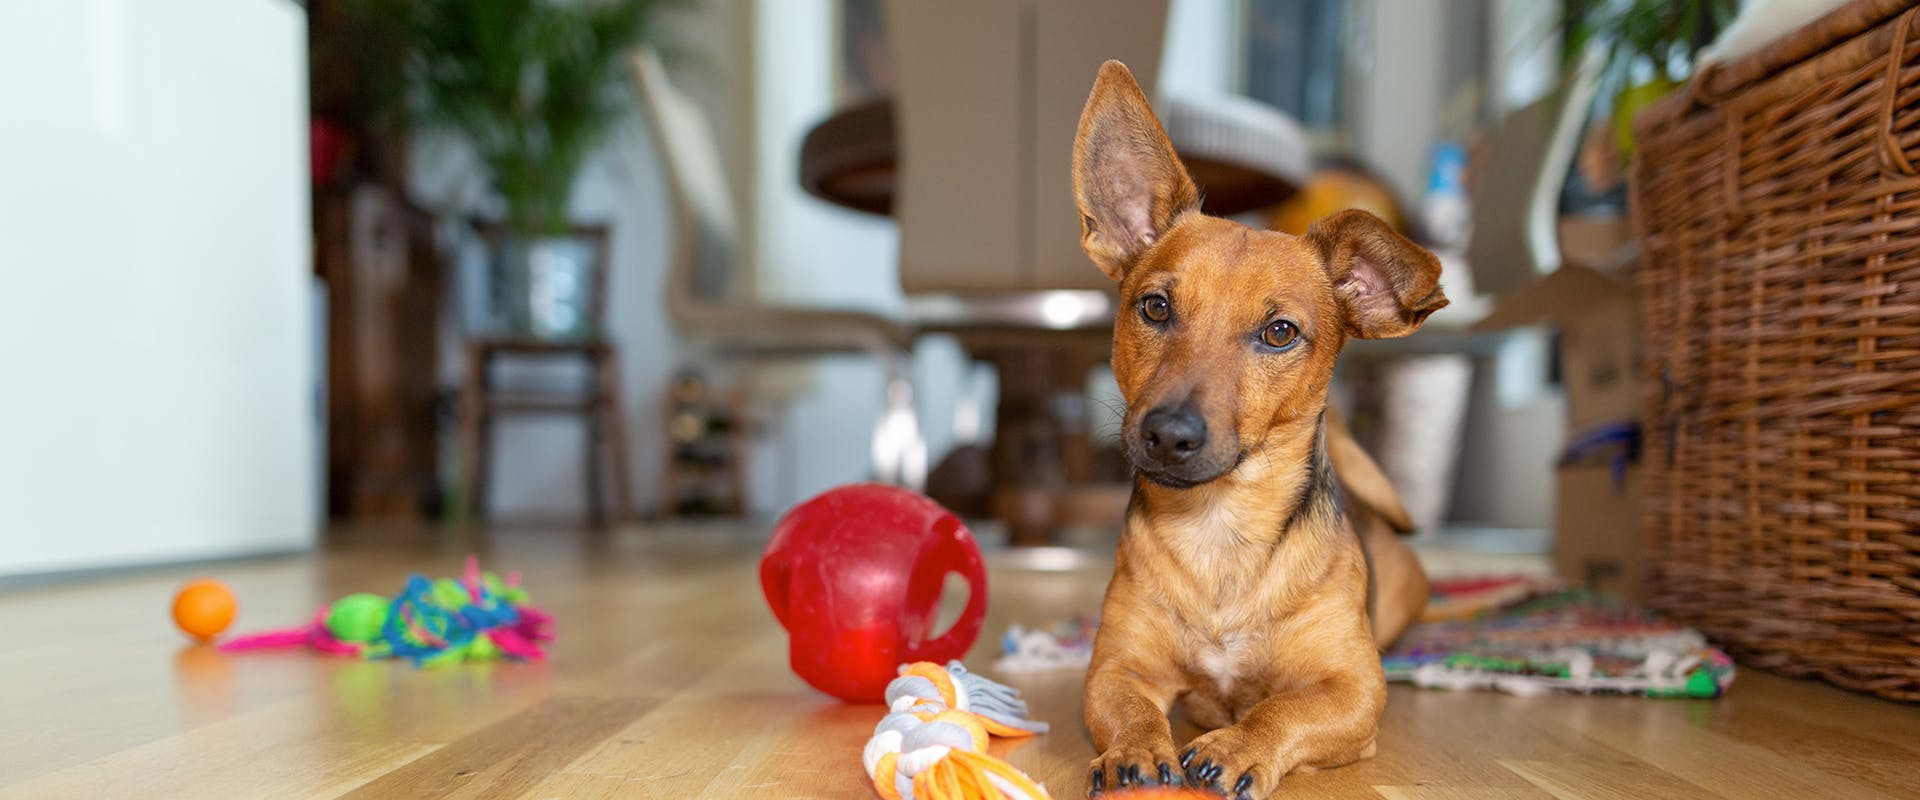 A small dog sitting on a hardwood floor, surrounded by dog toys